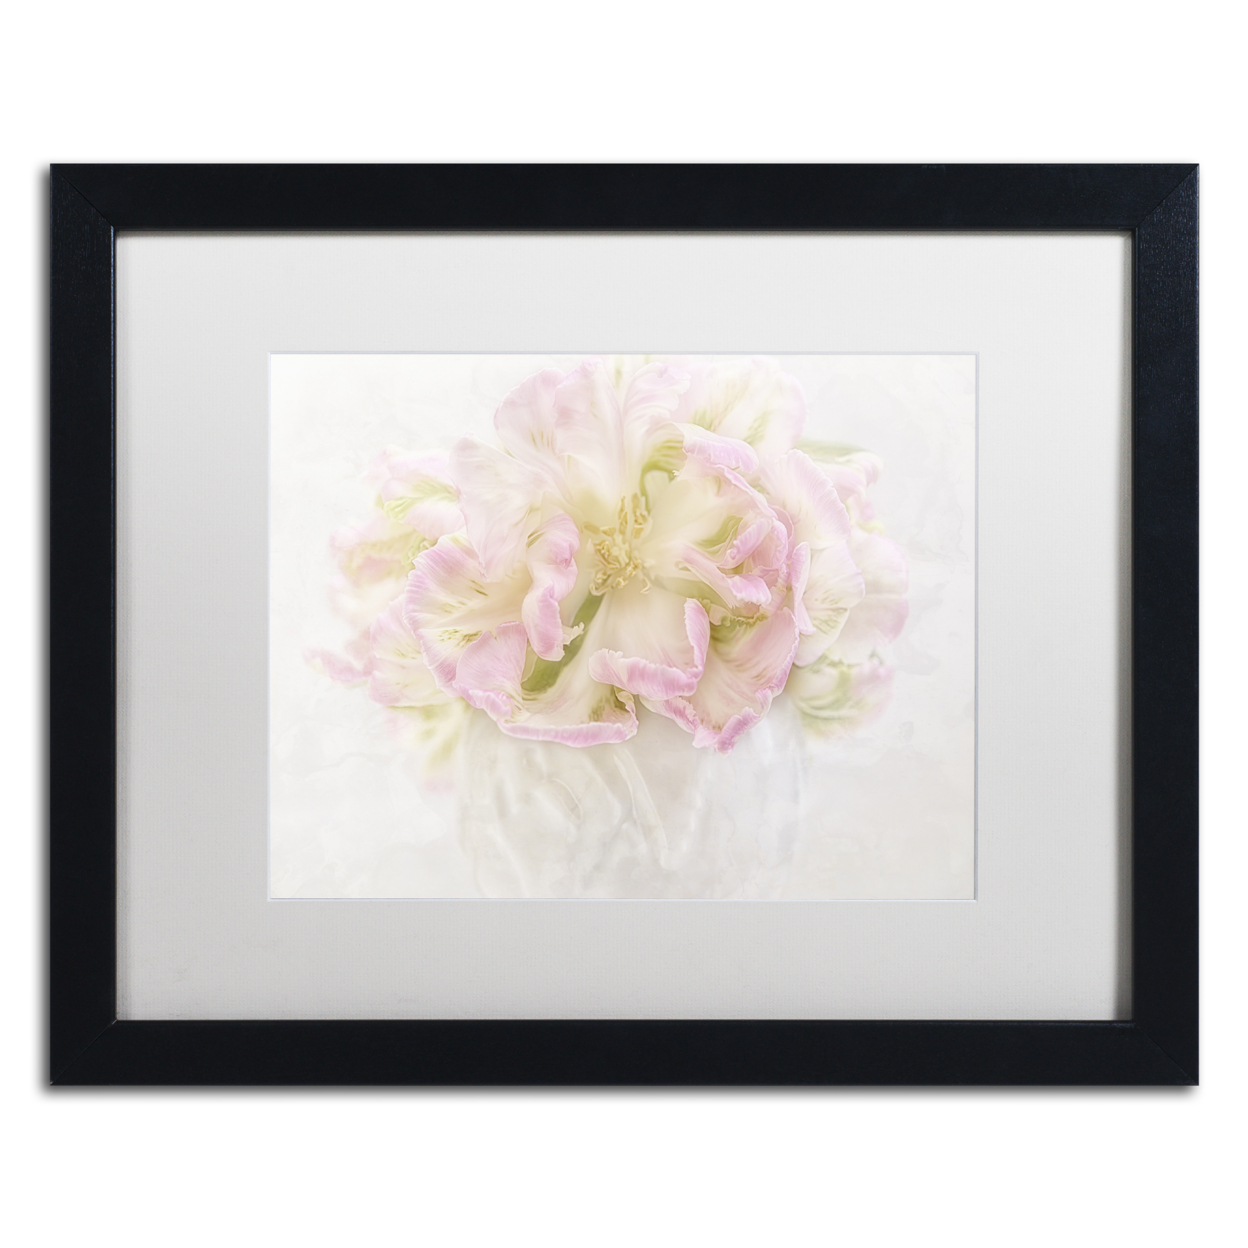 Cora Niele 'Pink Parrot Tulips Bouquet' Black Wooden Framed Art 18 X 22 Inches